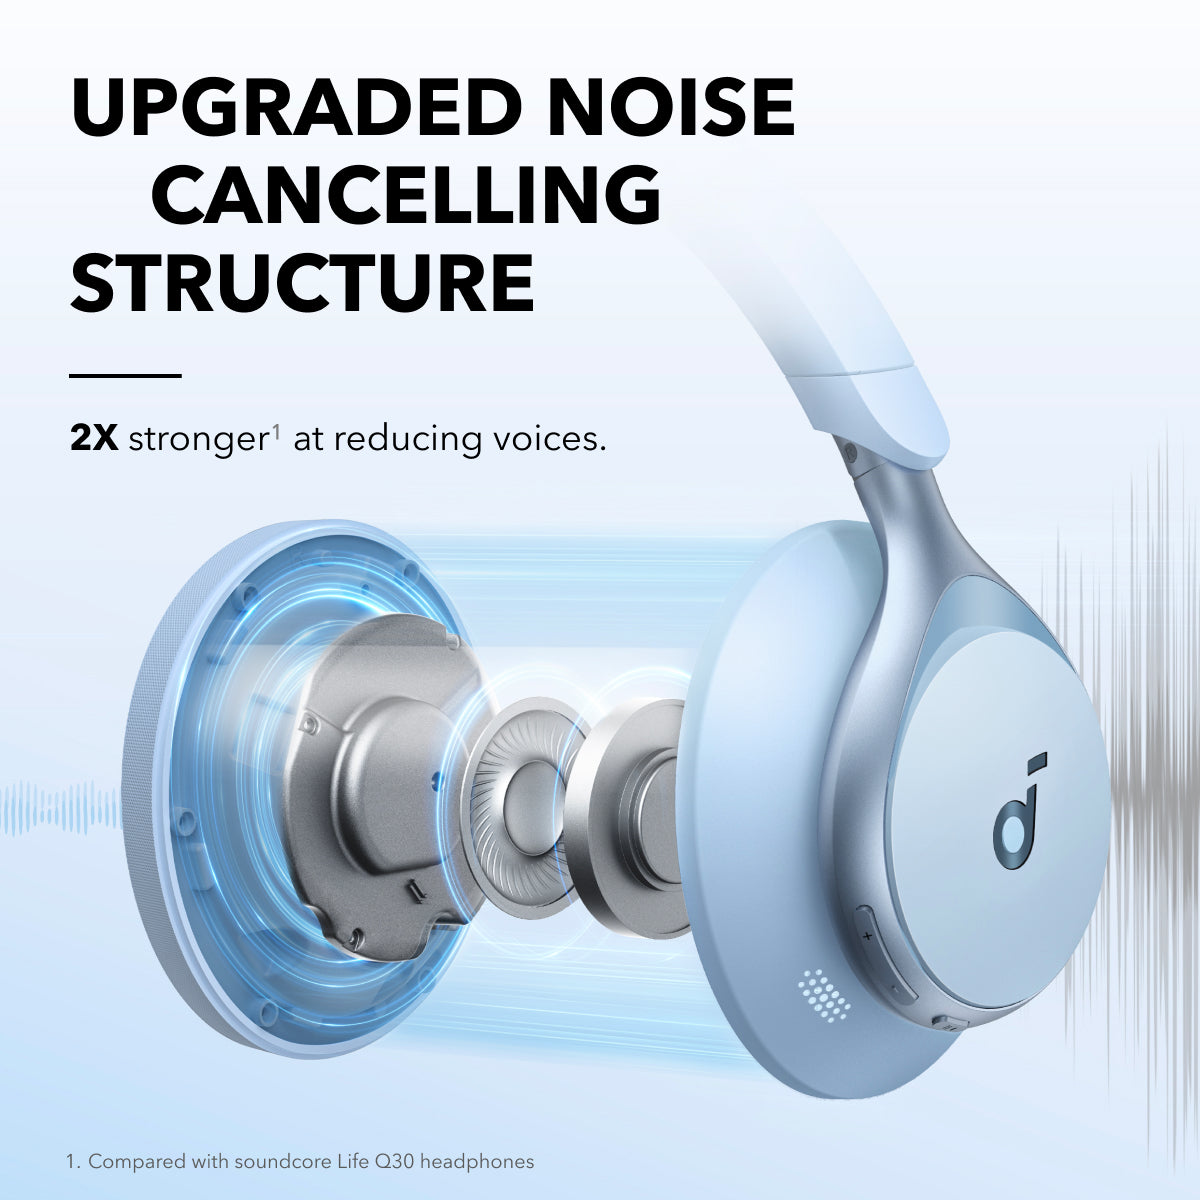 Soundcore by Anker, Space One, Active Noise Cancelling Headphones, 2X  Stronger Voice Reduction, 40H ANC Playtime, App Control, LDAC Hi-Res  Wireless